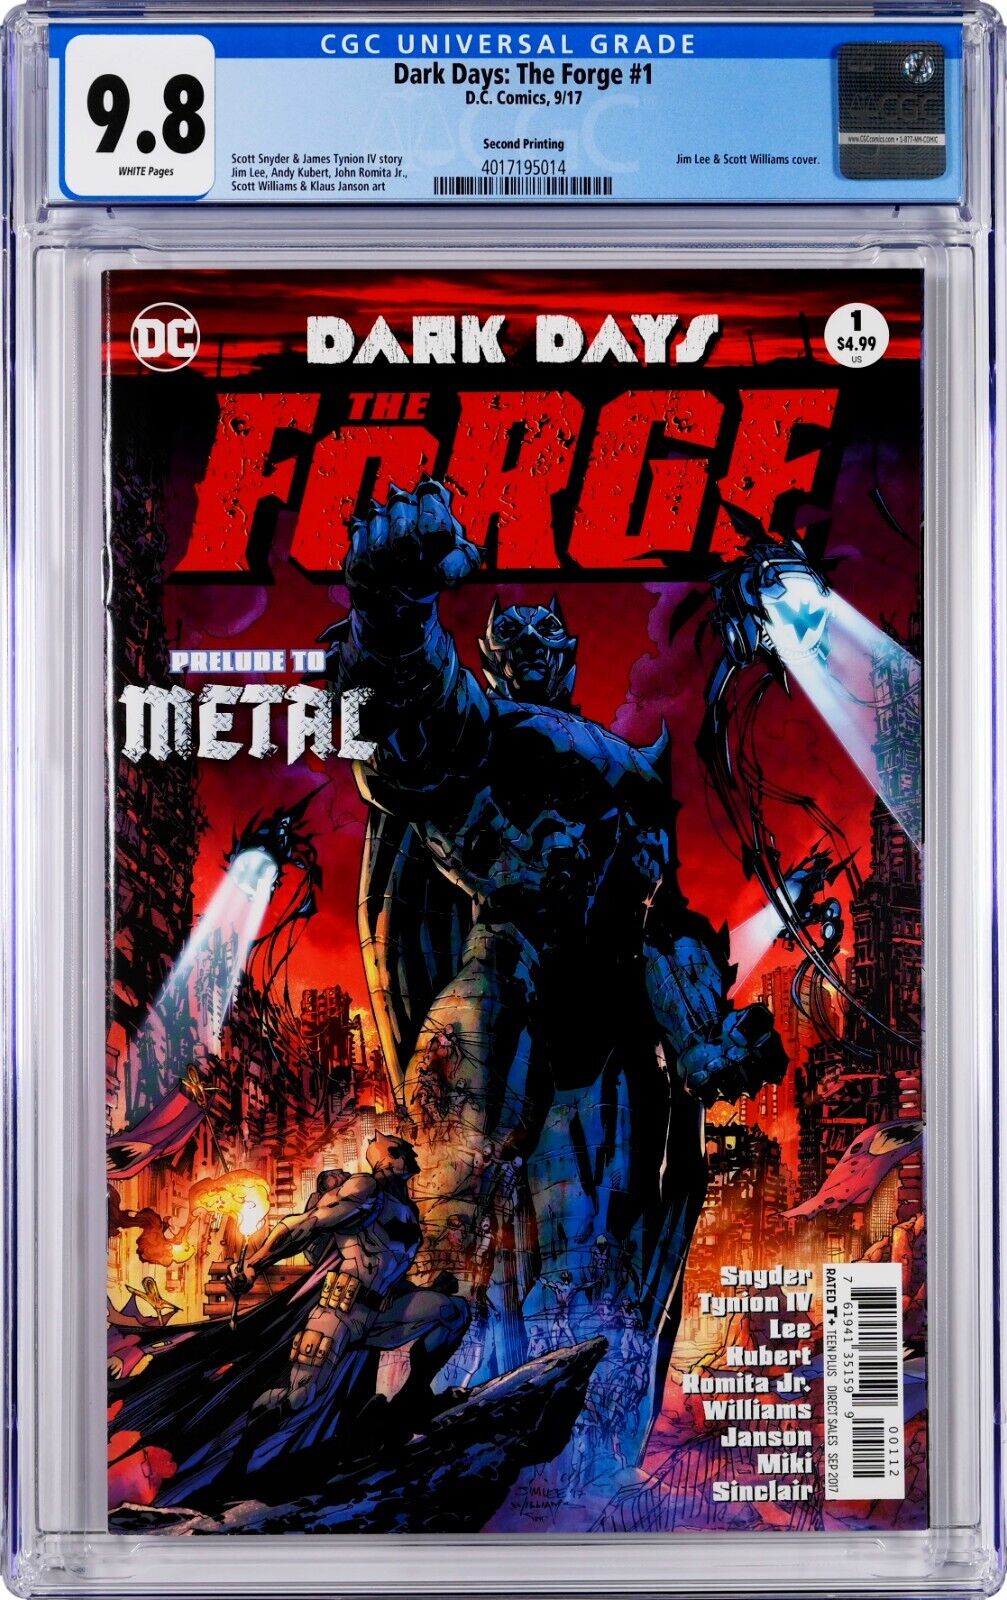 Dark Days: The Forge #1 CGC 9.8 (Sep 2017, DC) Jim Lee Cover, 2nd Printing